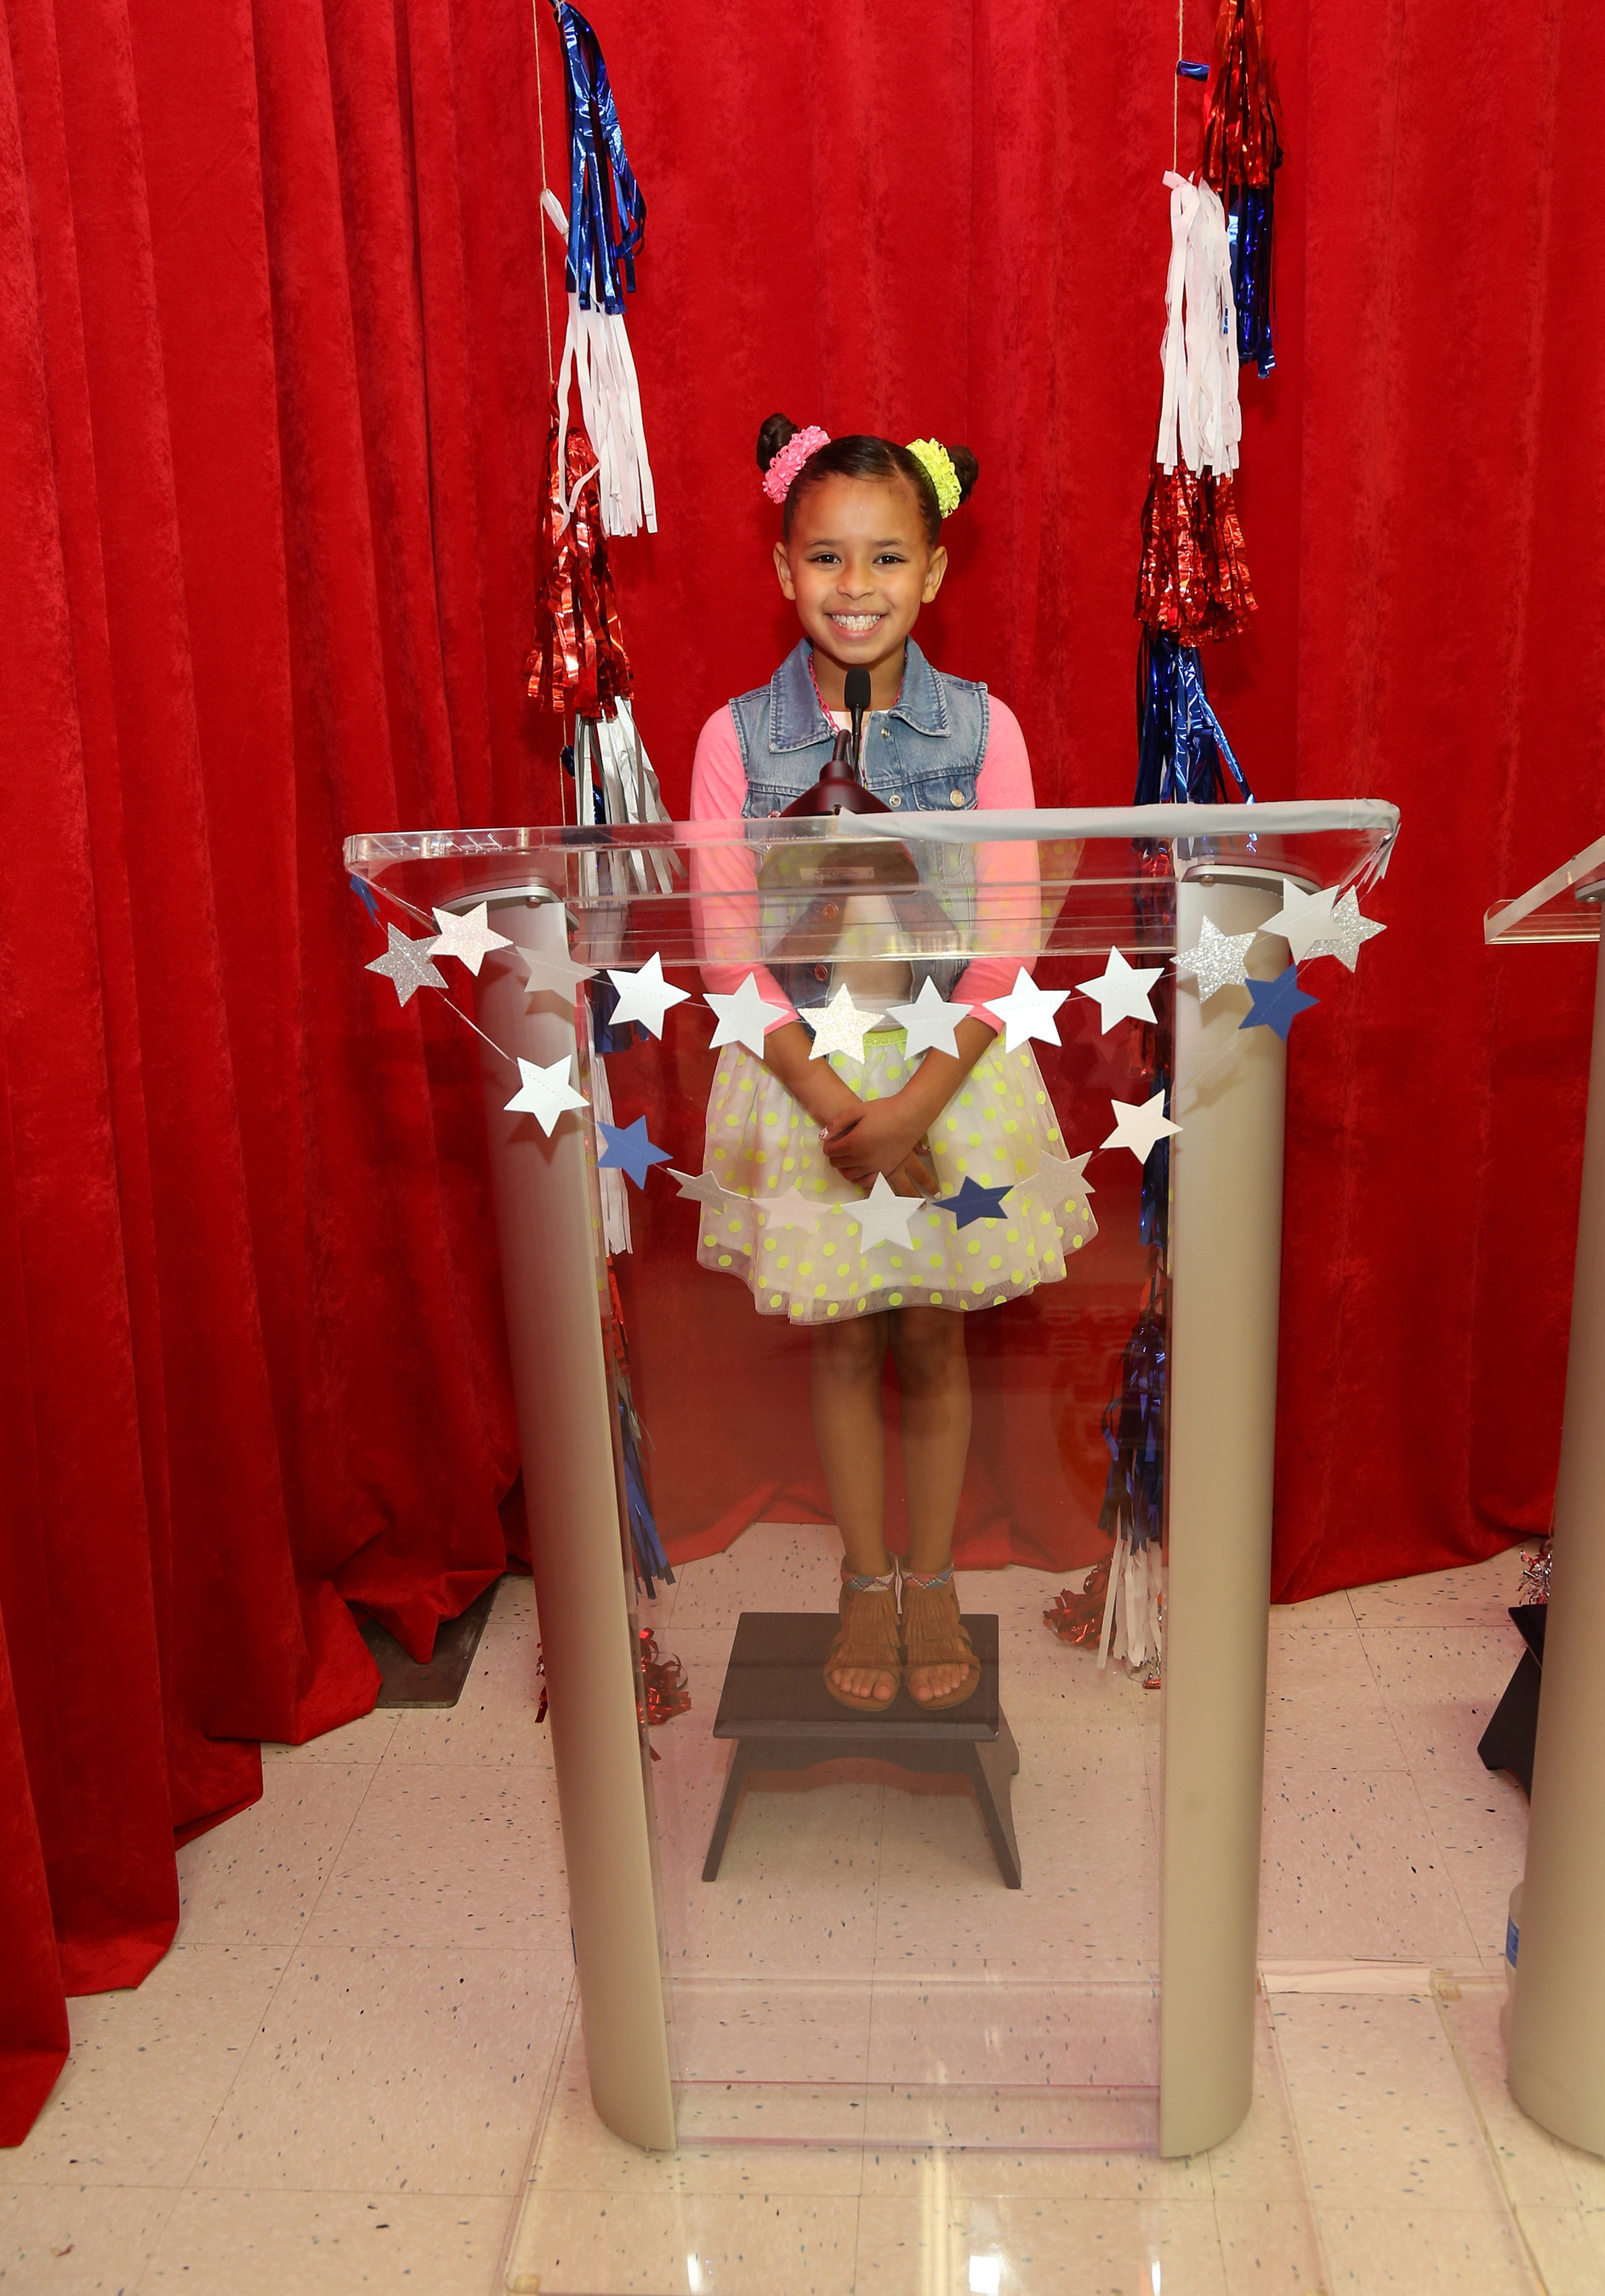 10-Year-Old Ariana Gentry from Swansea, IL is named the first-ever Toys"R"Us President of Play